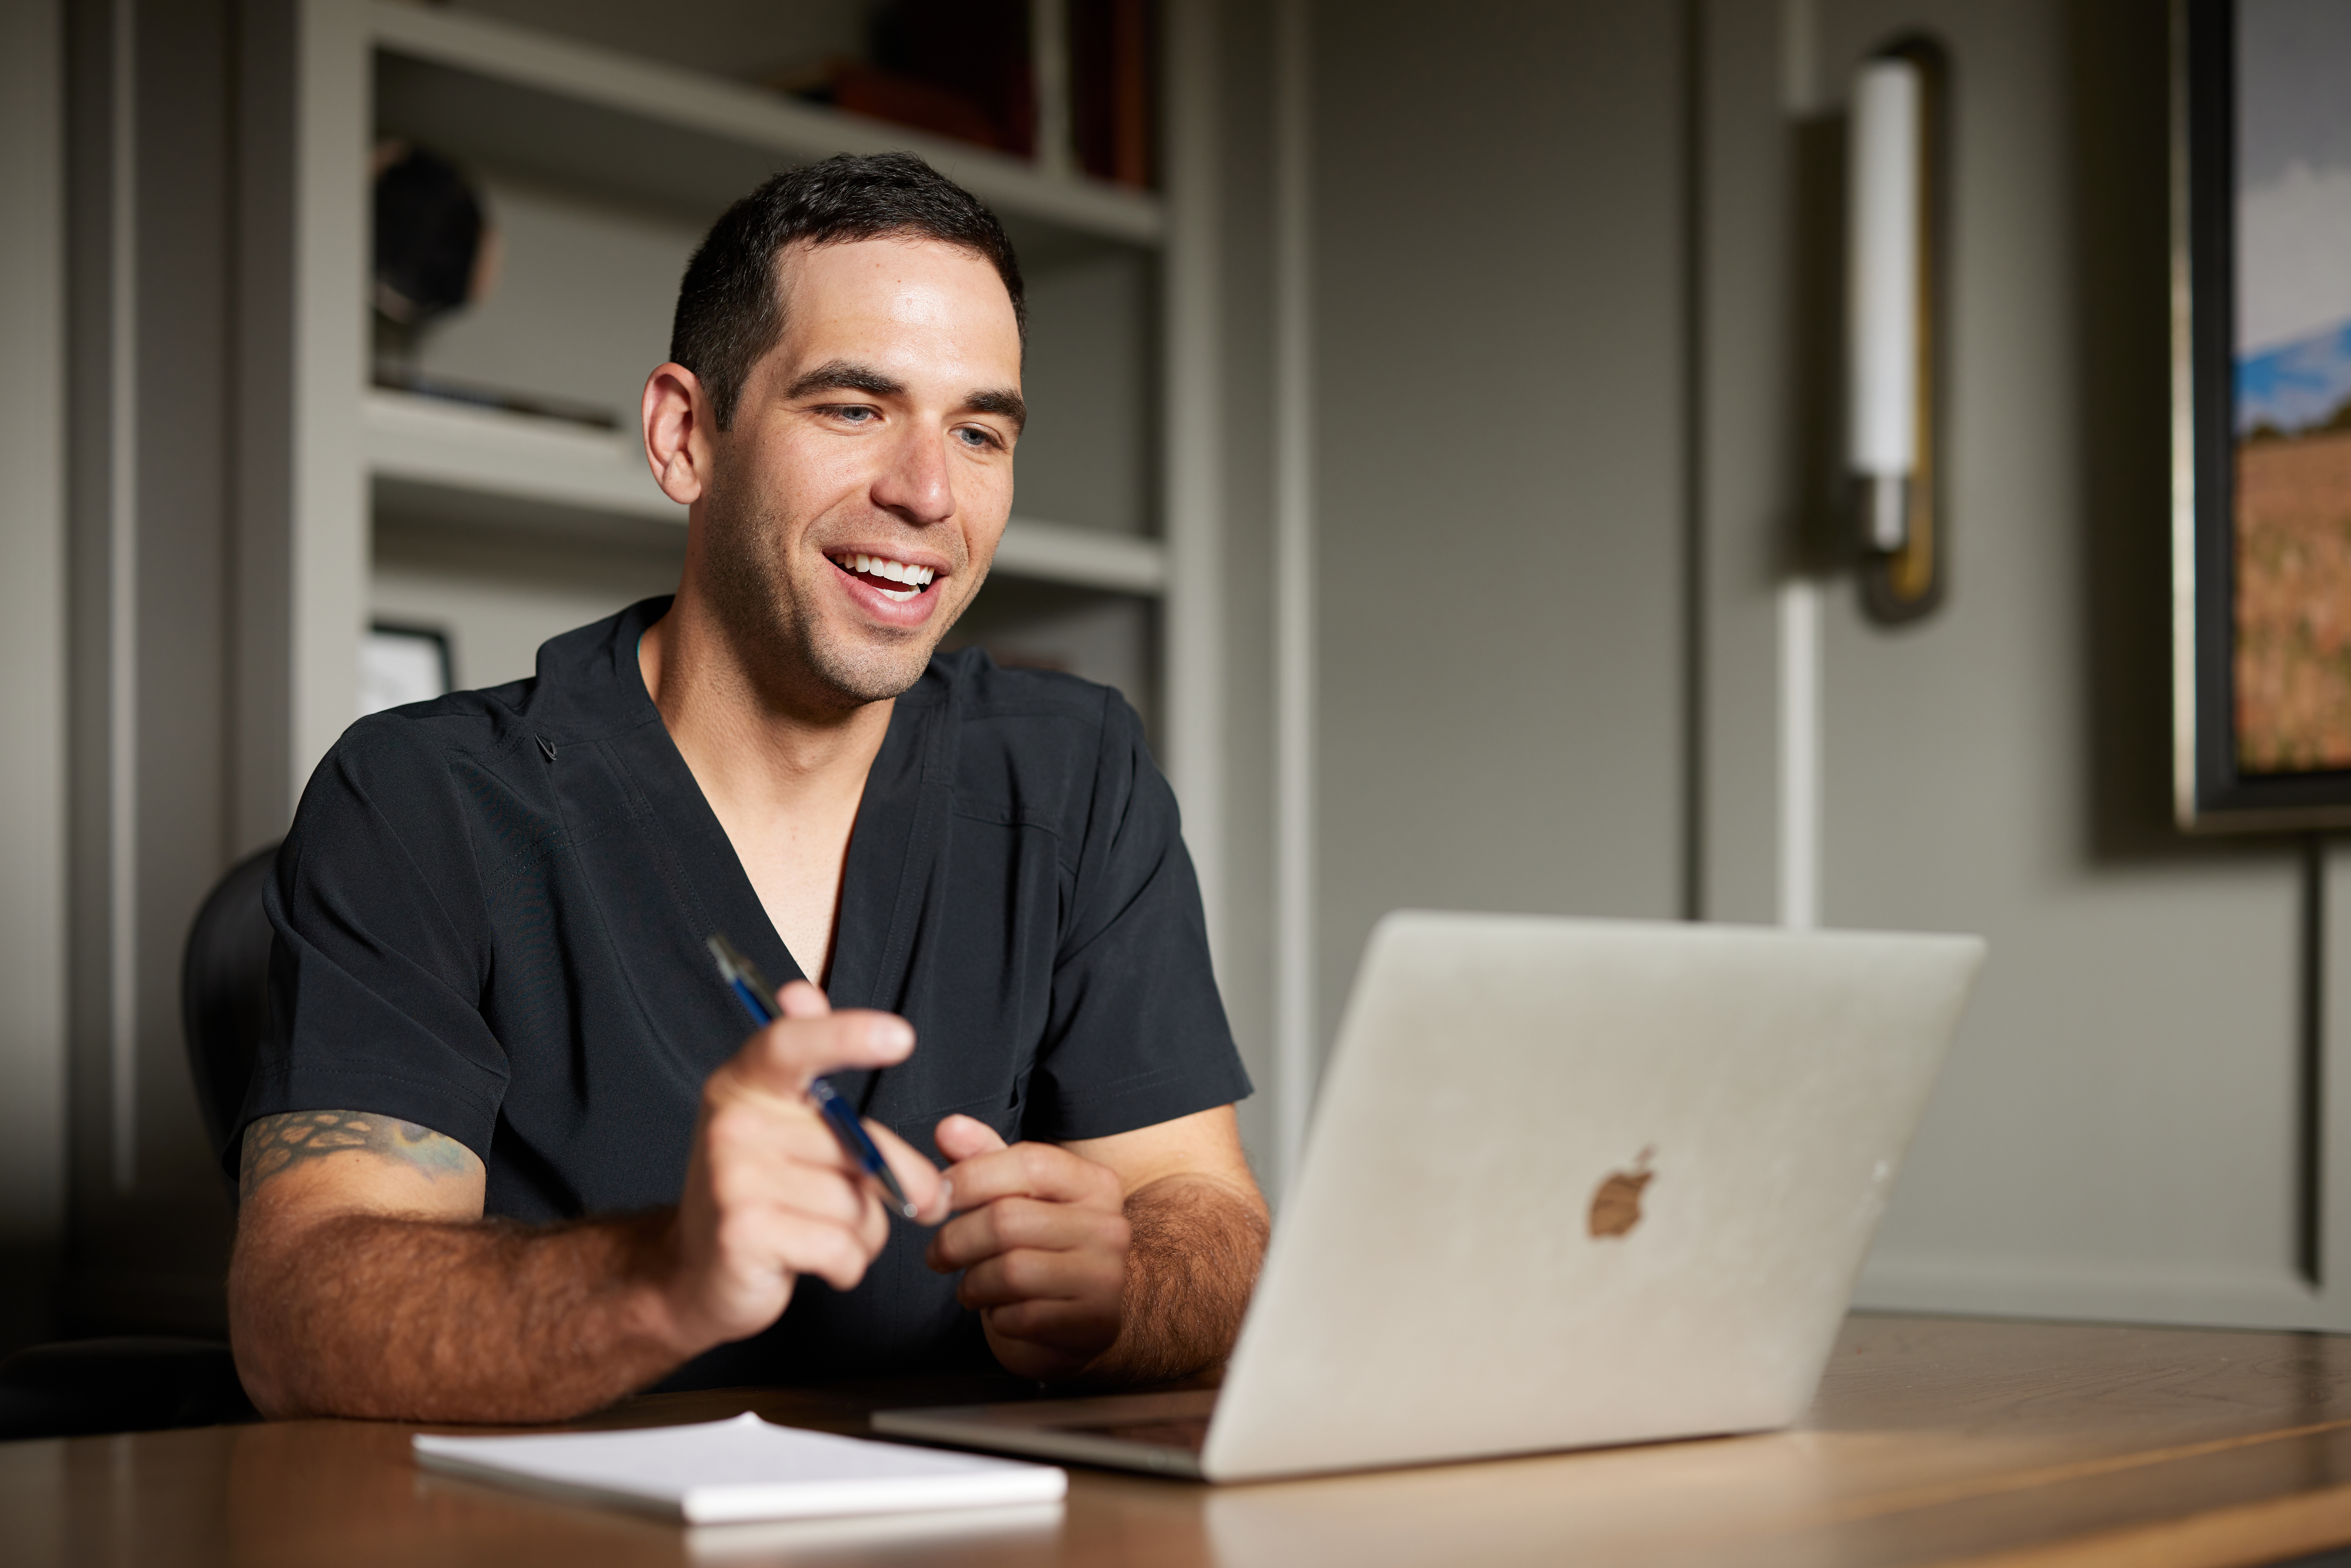 Dentist wearing dark scrubs reviewing finances on his computer in a home office